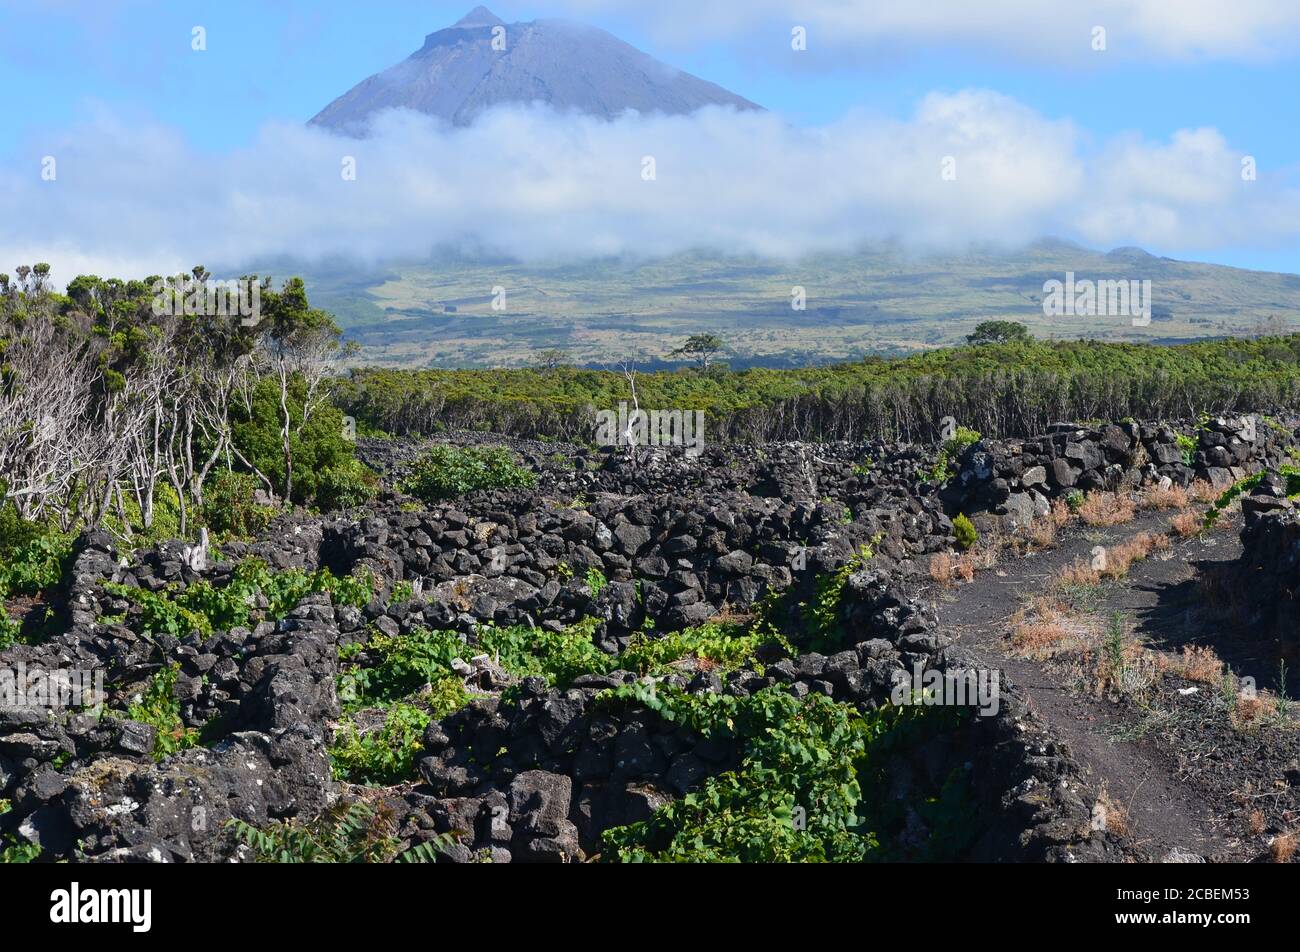 The conical Pico volcano looming ove traditional vineyards in Pico island, Azores archipelago, Portugal Stock Photo